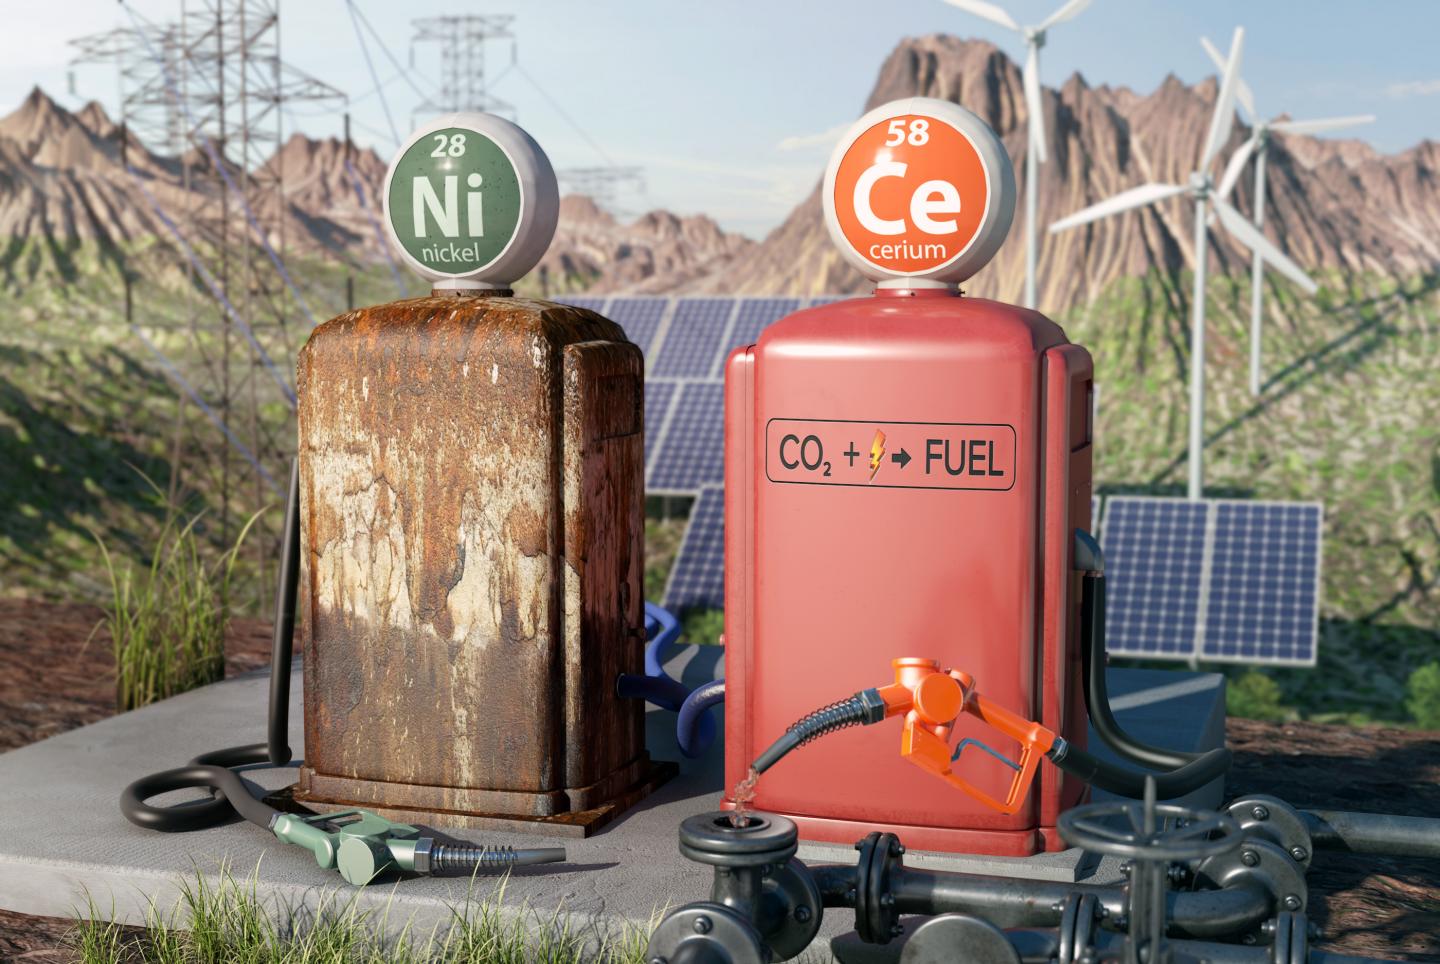 New Route to Carbon-Neutral Fuels from Carbon Dioxide